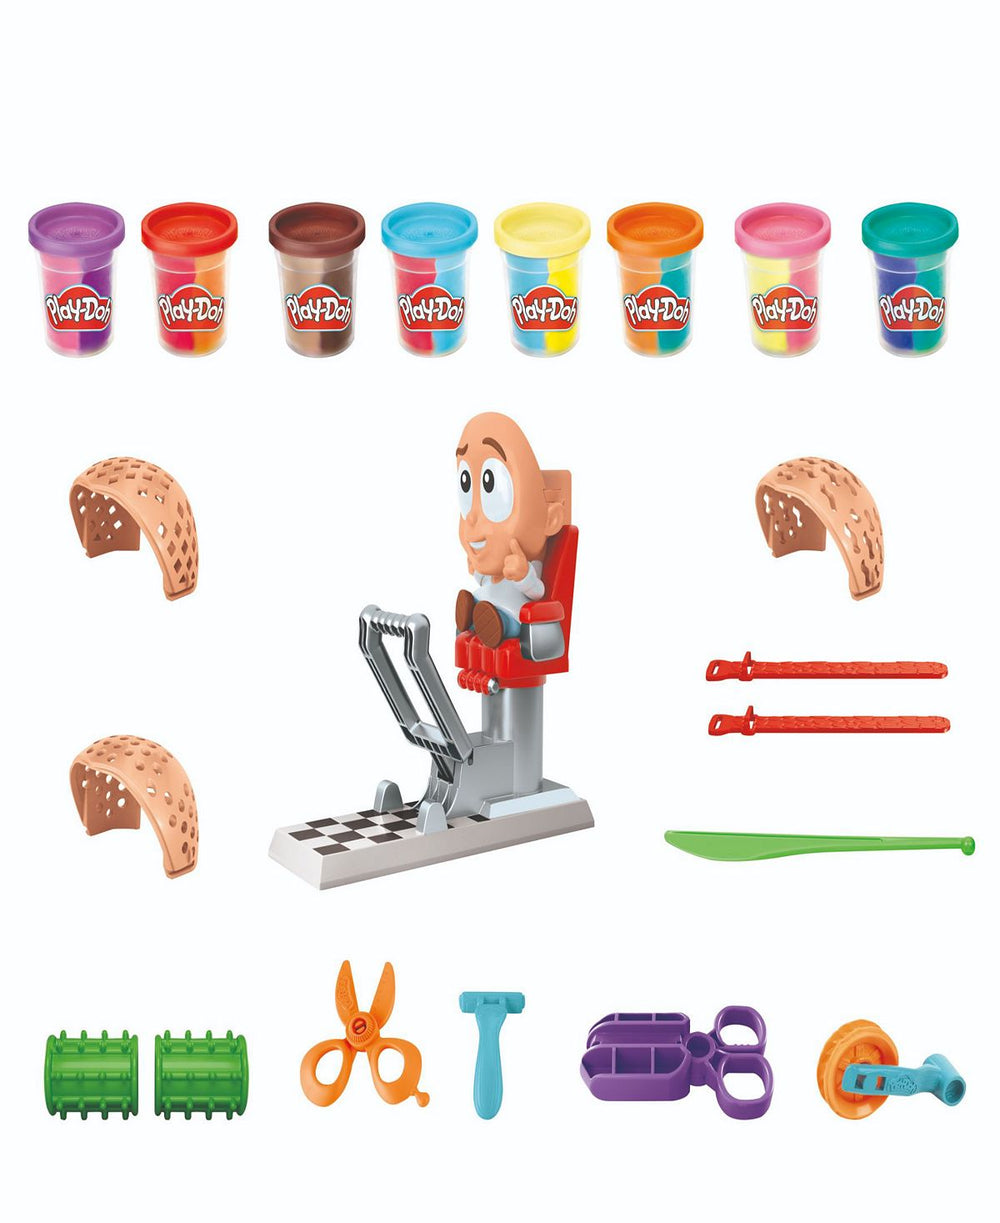 Play-Doh Crazy Cuts Stylist Hair Salon Playset with 8 Tri-Color Cans